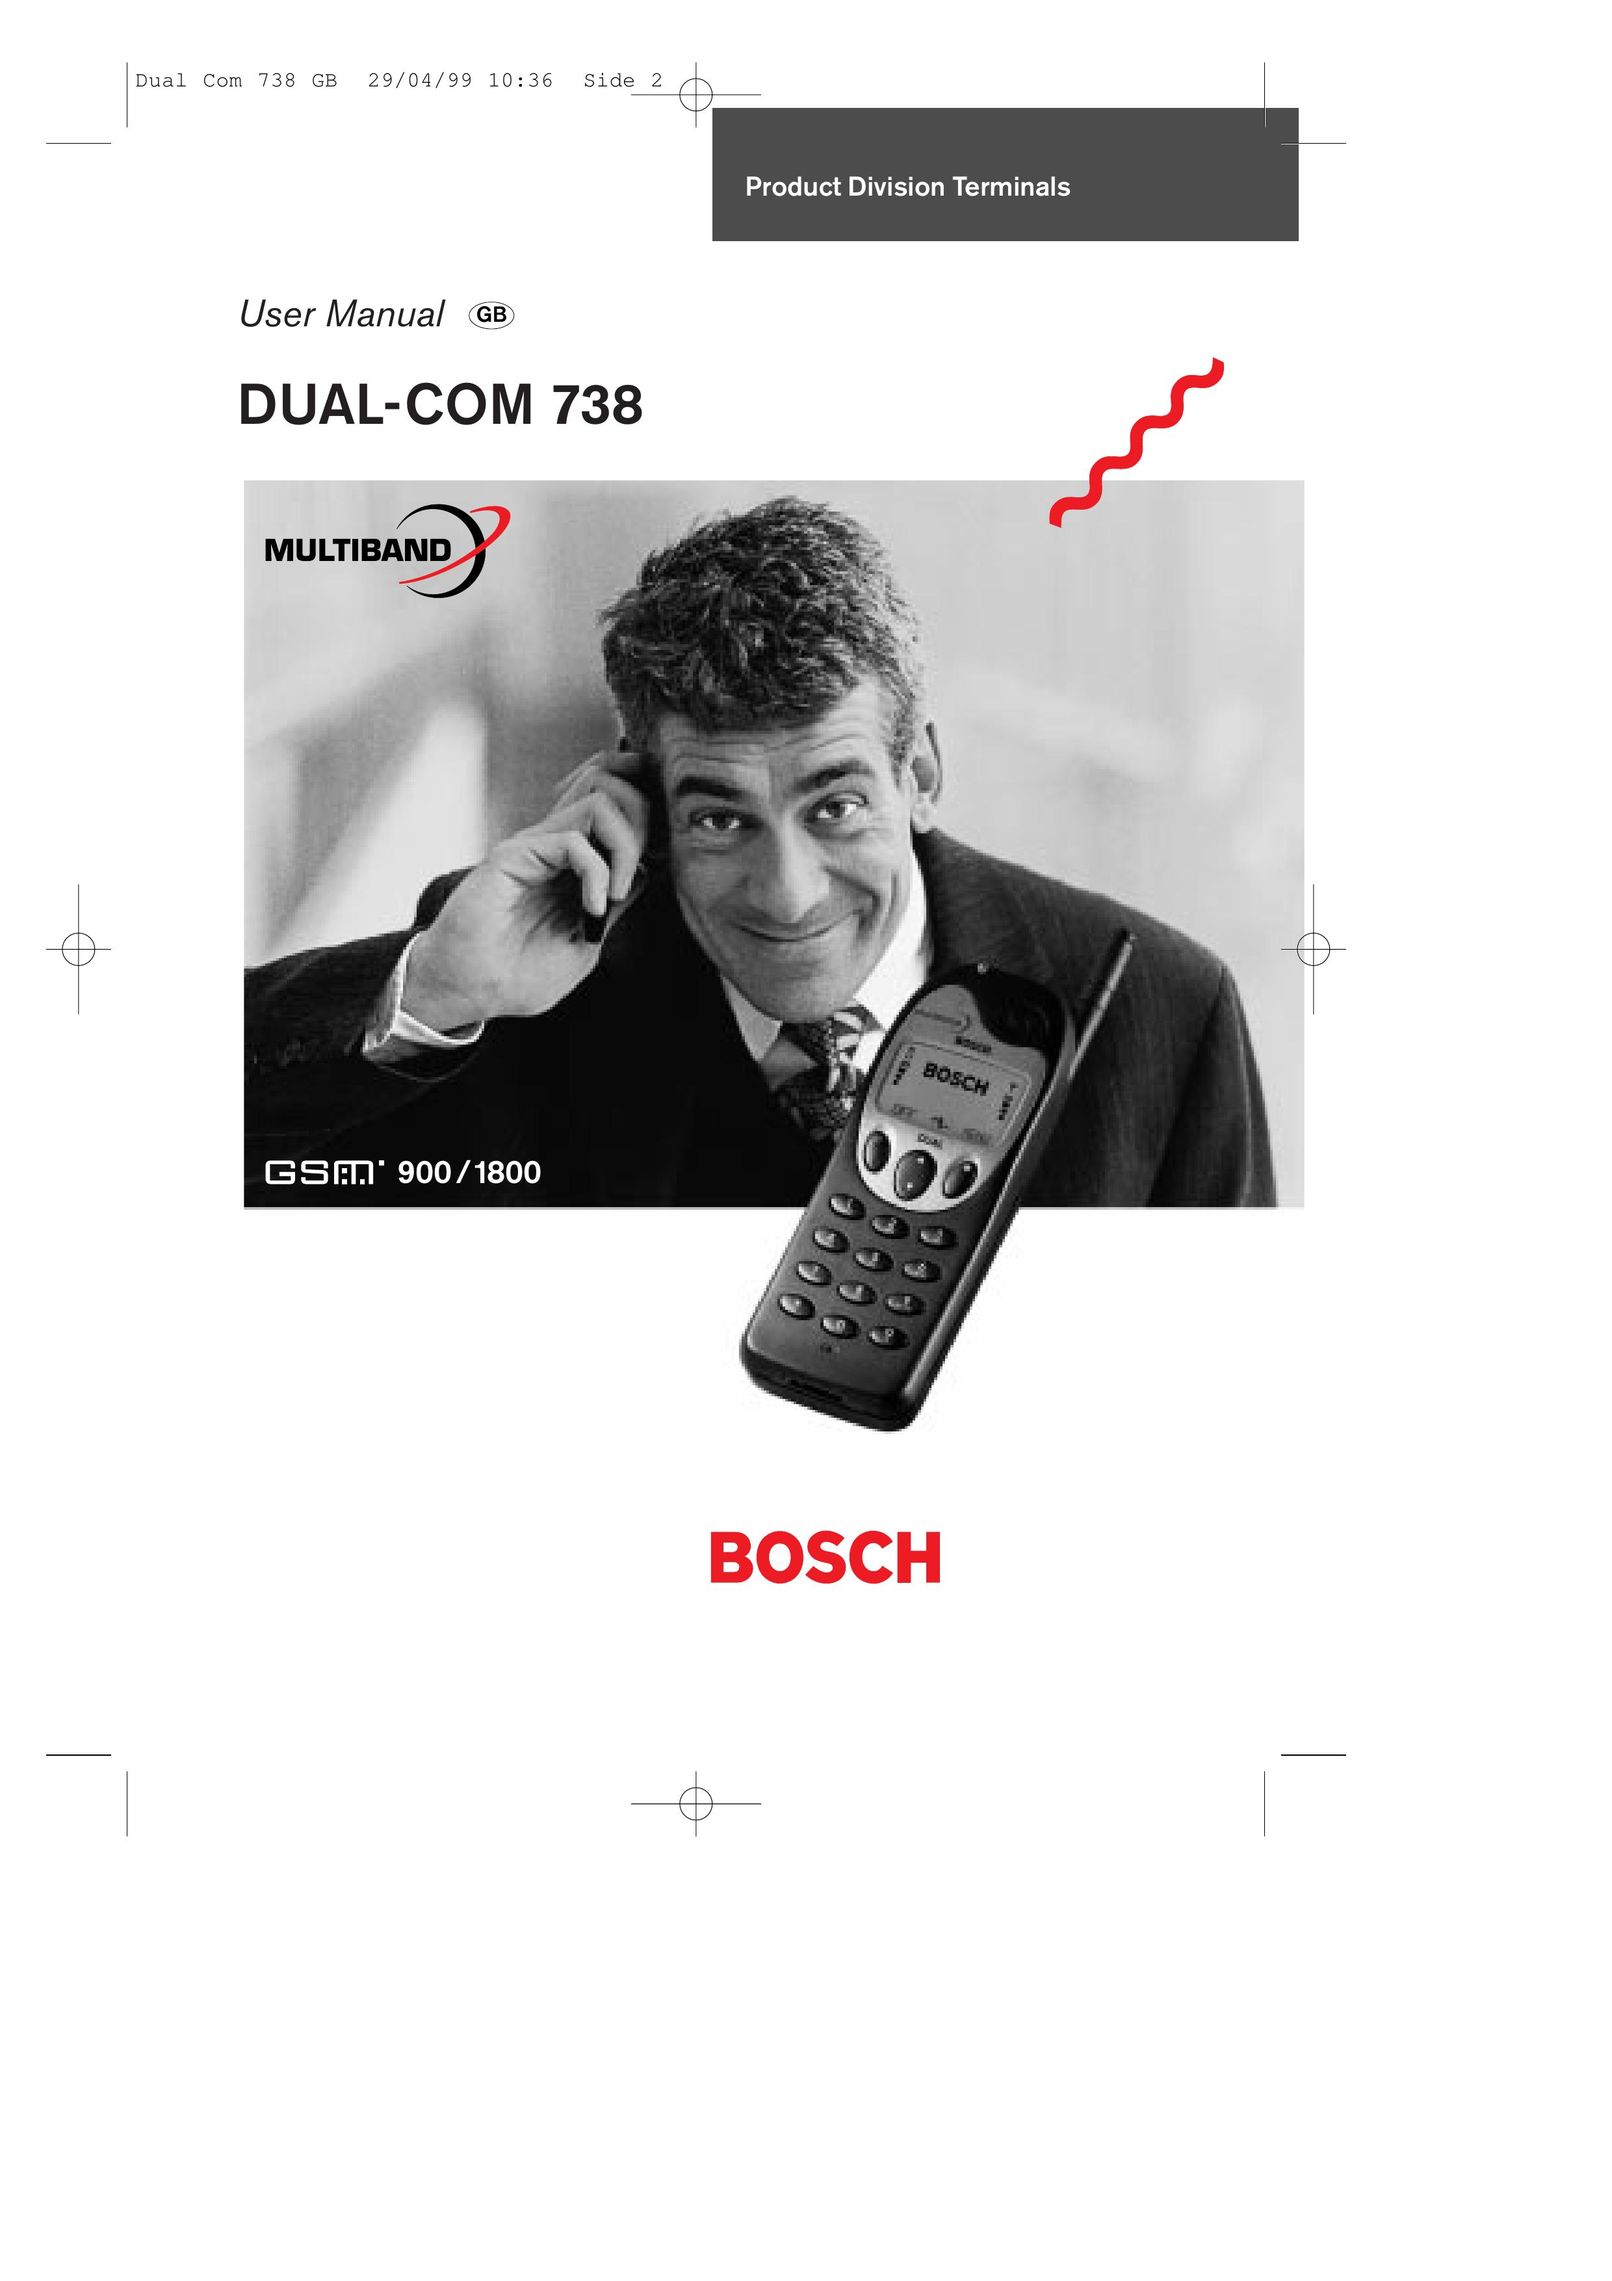 Bosch Appliances QSM 900 Cell Phone User Manual (Page 1)